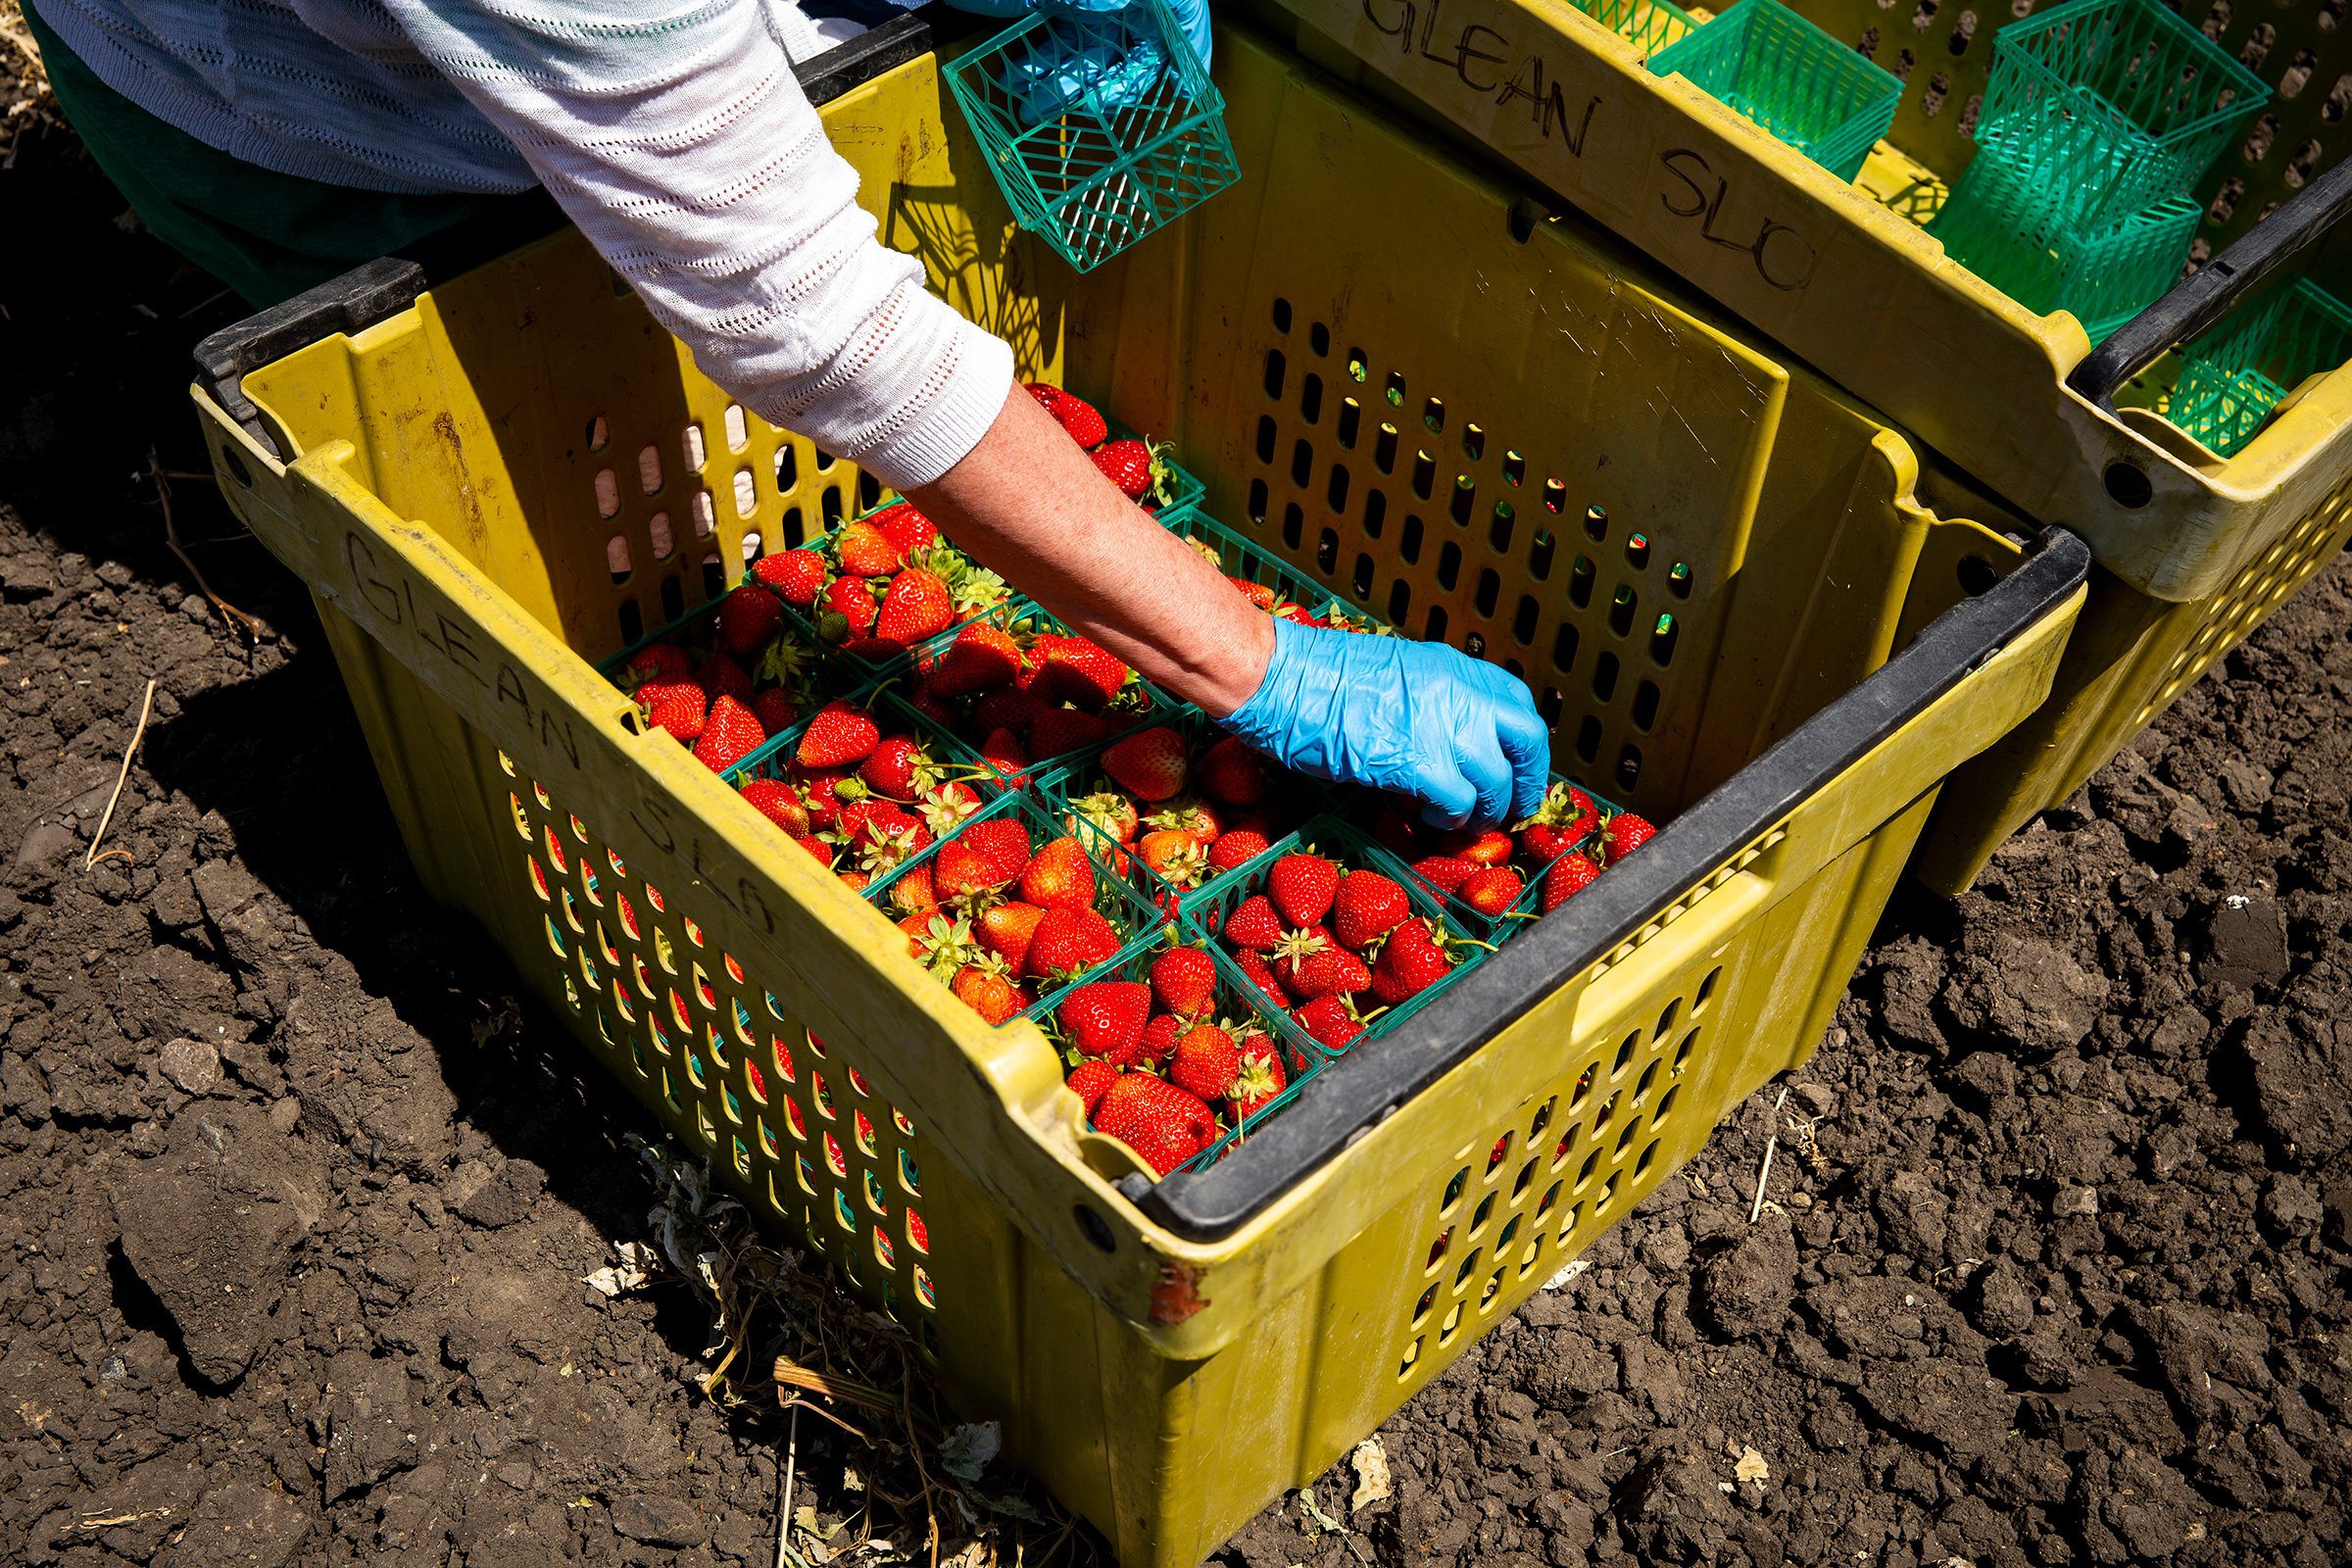 A volunteer with GleanSLO organizes strawberries in a bin at a farm in San Luis Obispo, Calif., on June 4, 2020. Before the pandemic, GleanSLO volunteers typically gleaned from backyard fruit trees—now they visit farms.